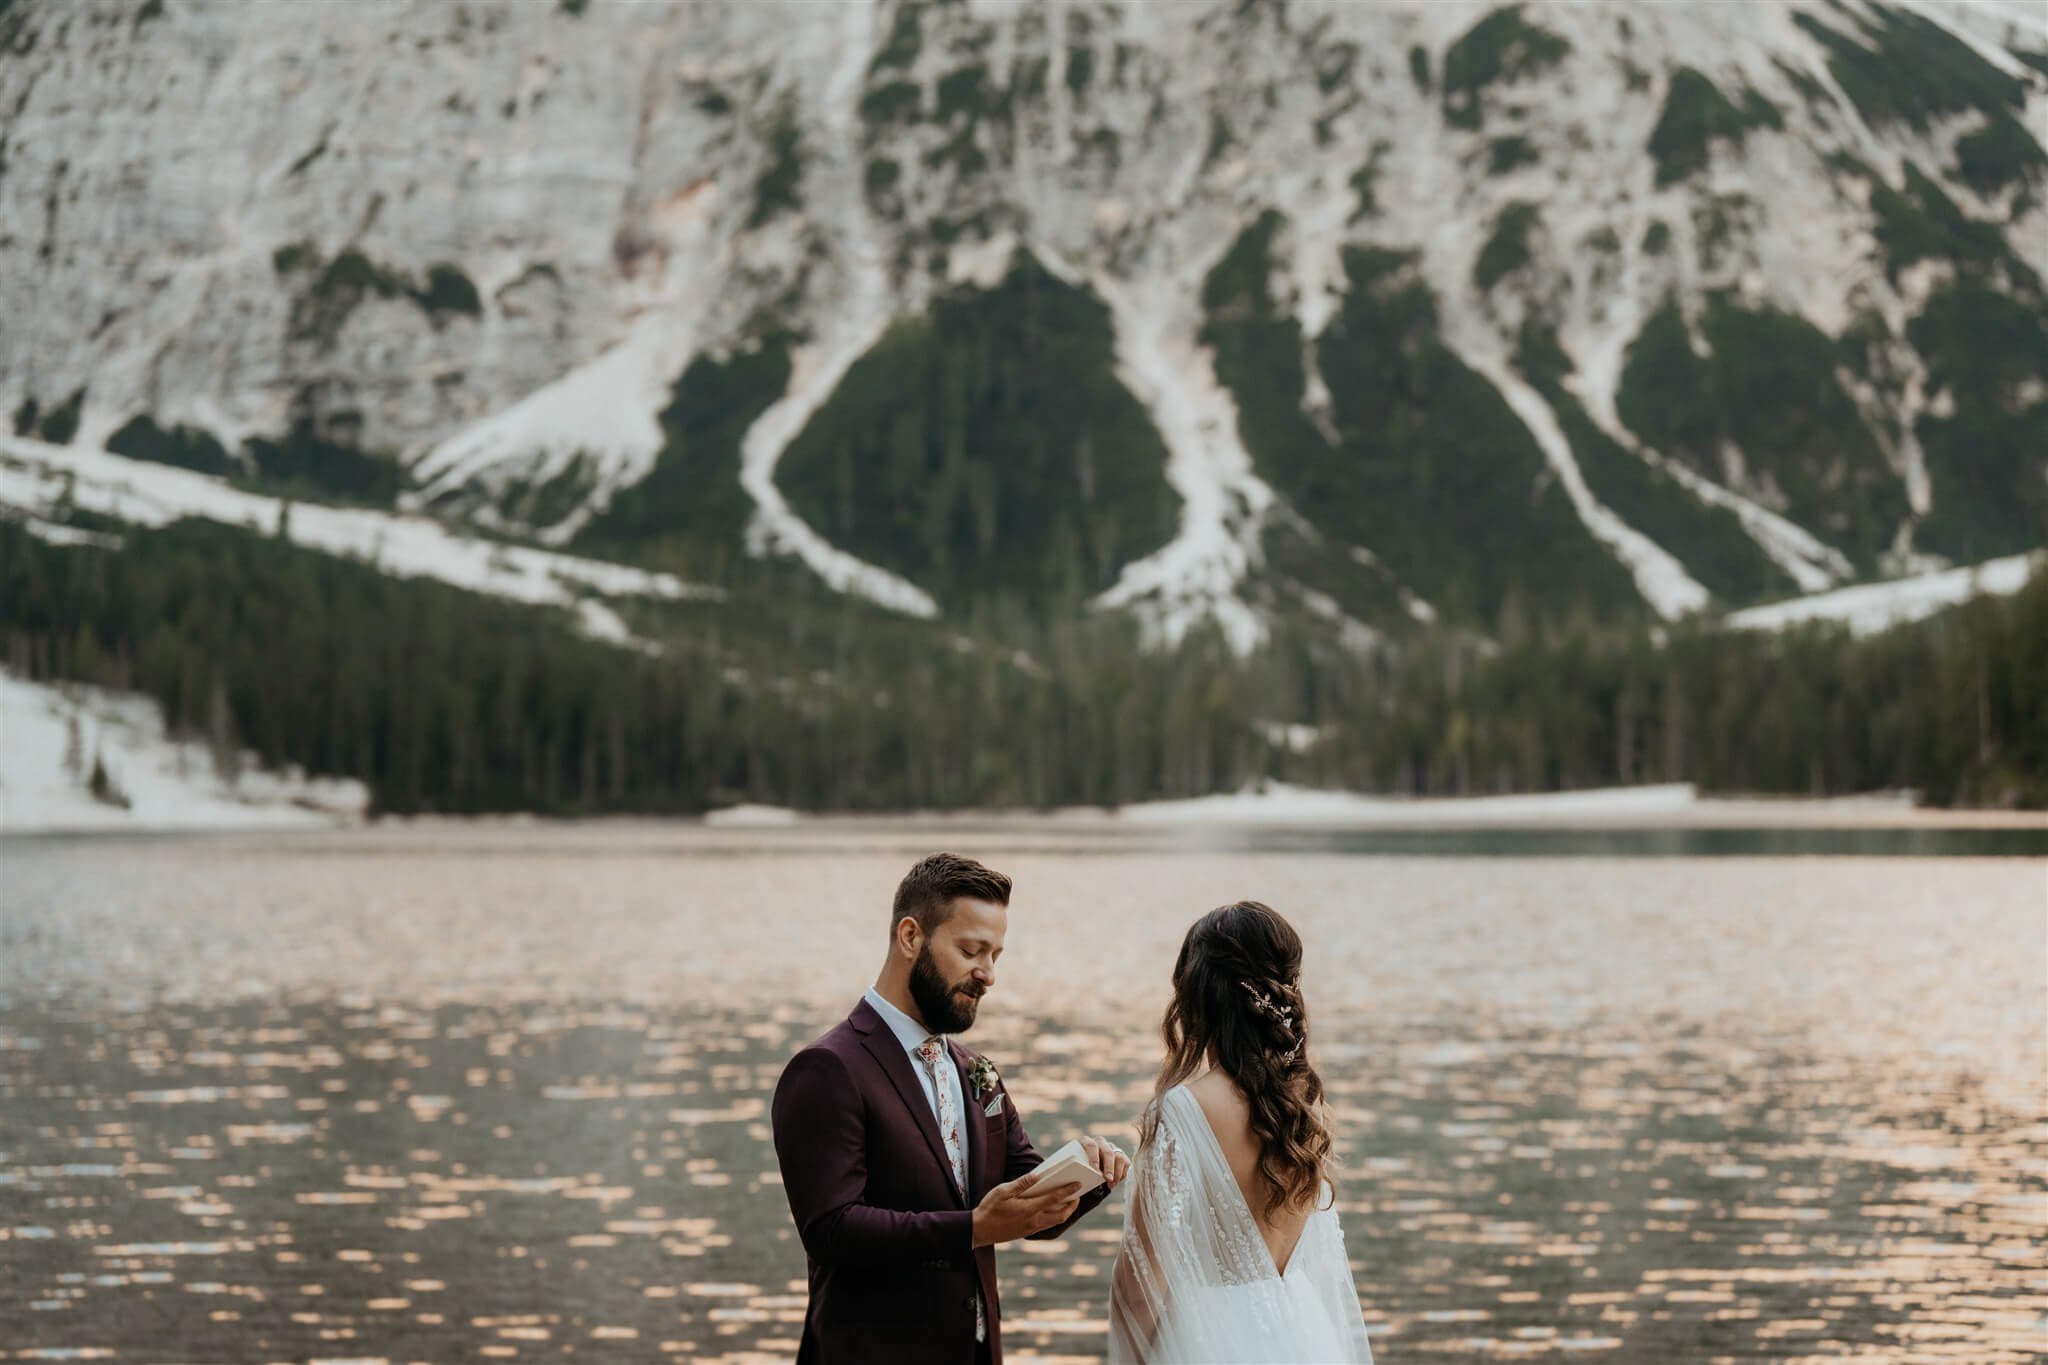 Bride and groom exchange vows by the lake at intimate vow renewal in Italy